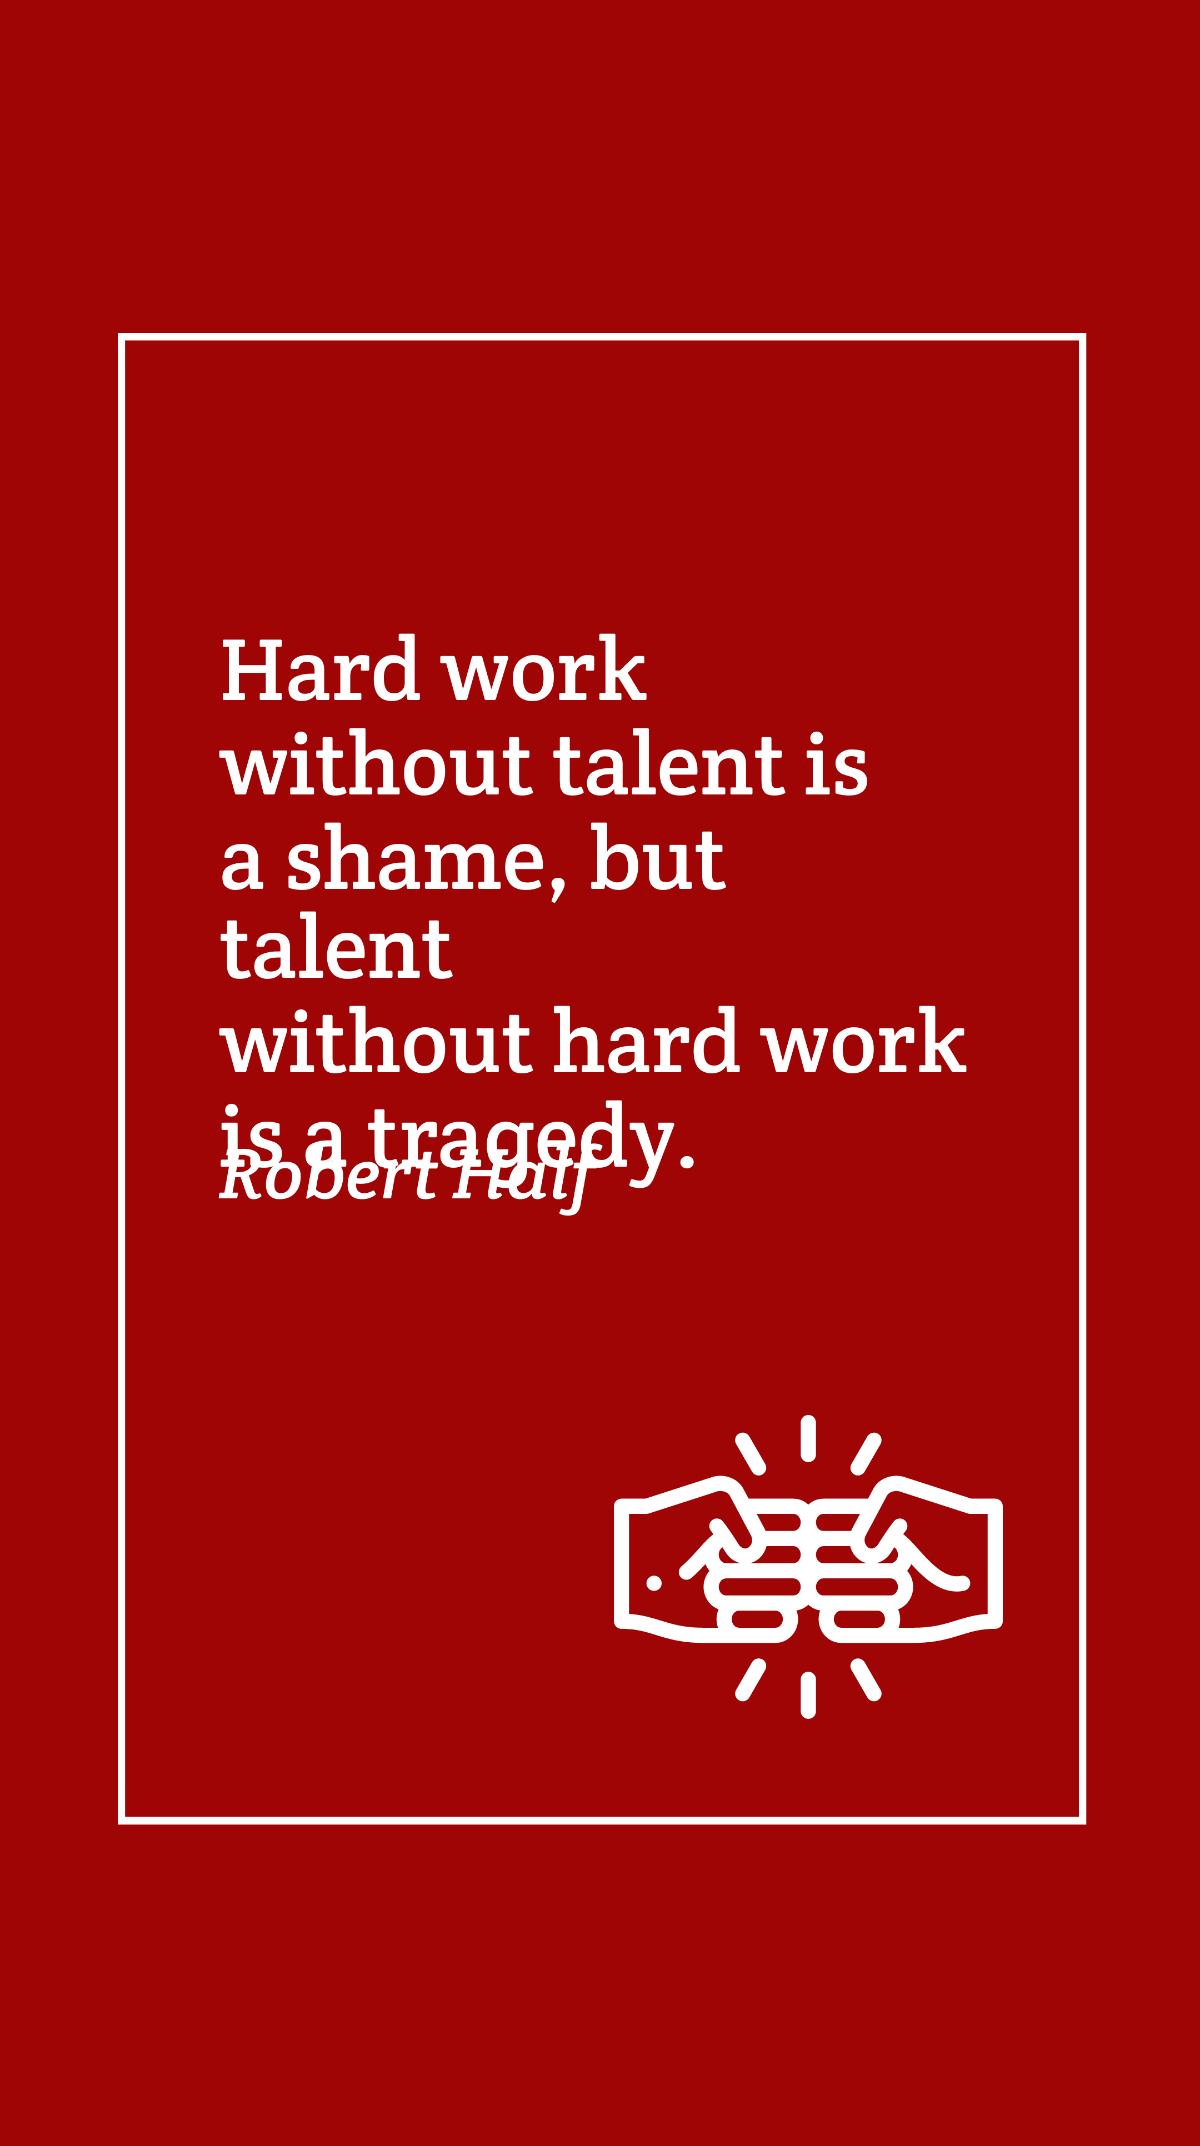 Free Robert Half - Hard work without talent is a shame, but talent without hard work is a tragedy. Template